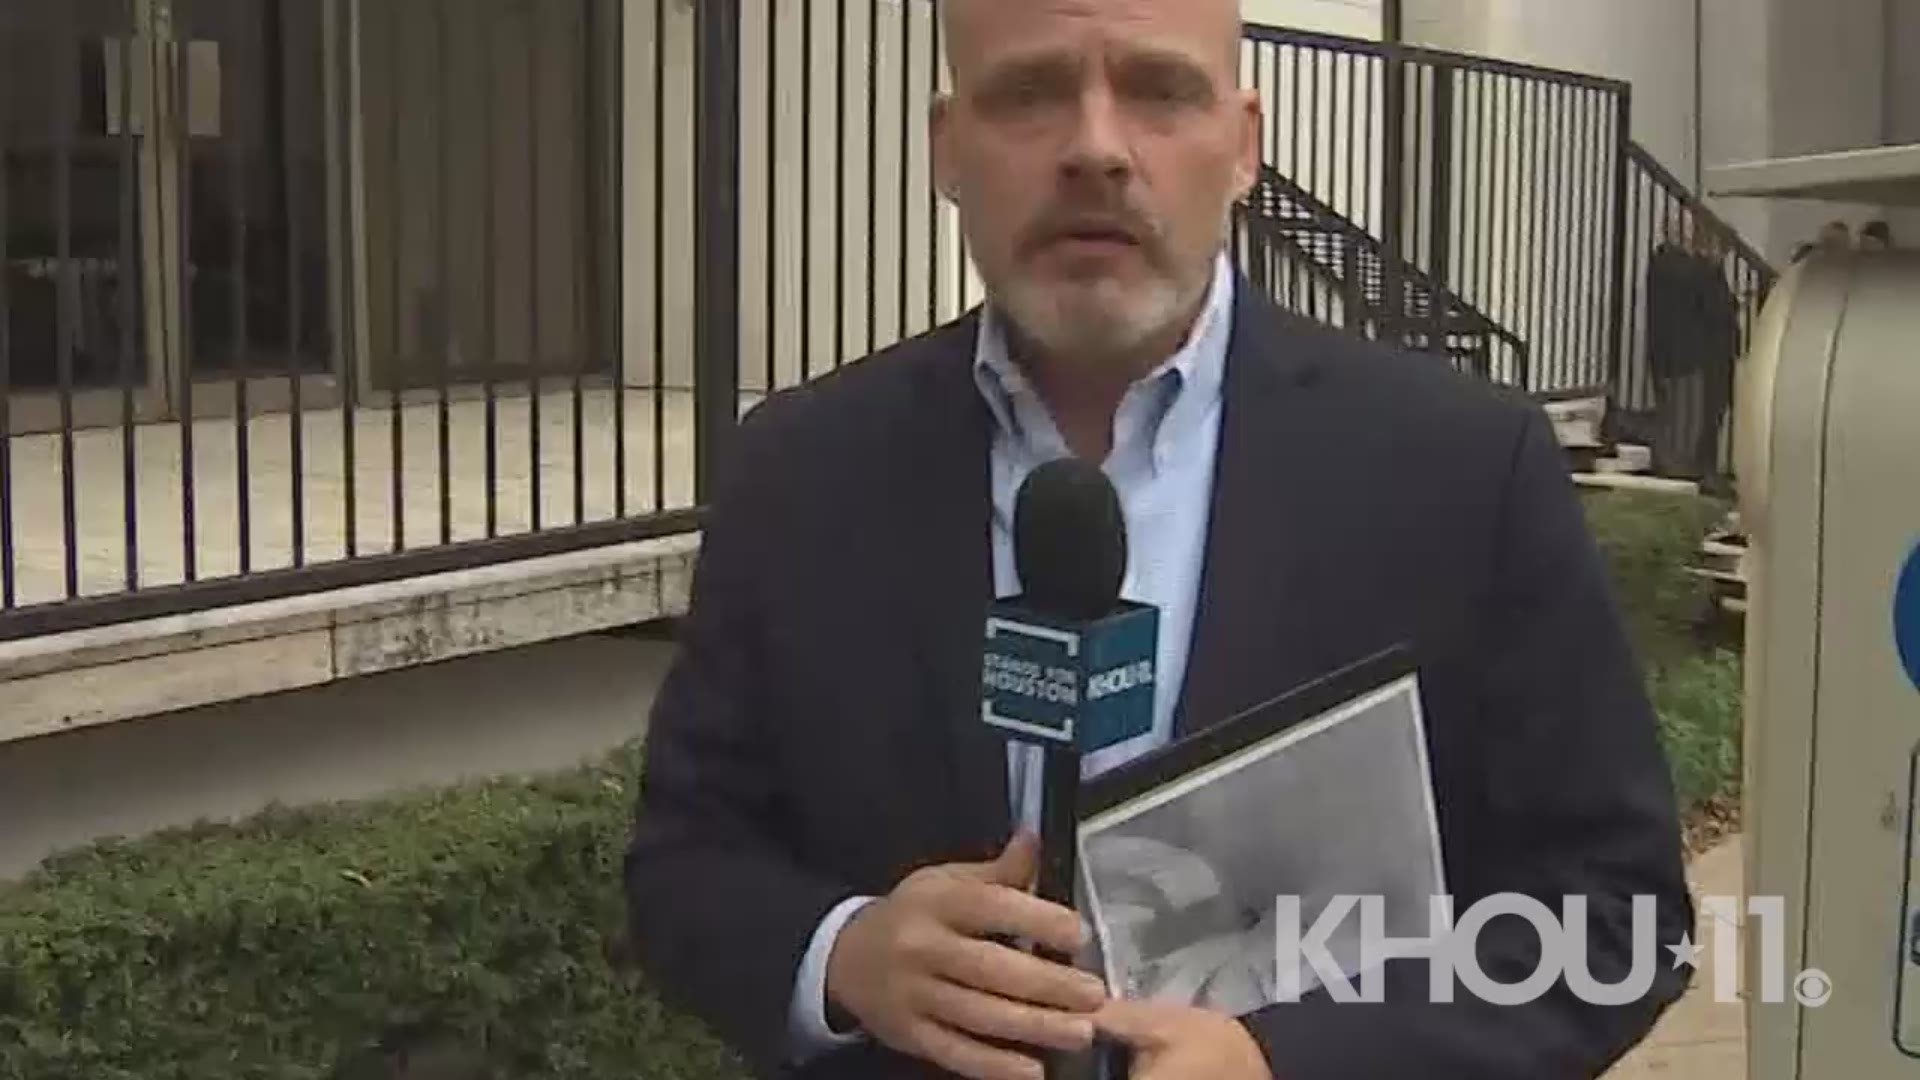 KHOU 11 Investigates reporter Jeremy Rogalski reports from the Archdiocese of Galveston-Houston.